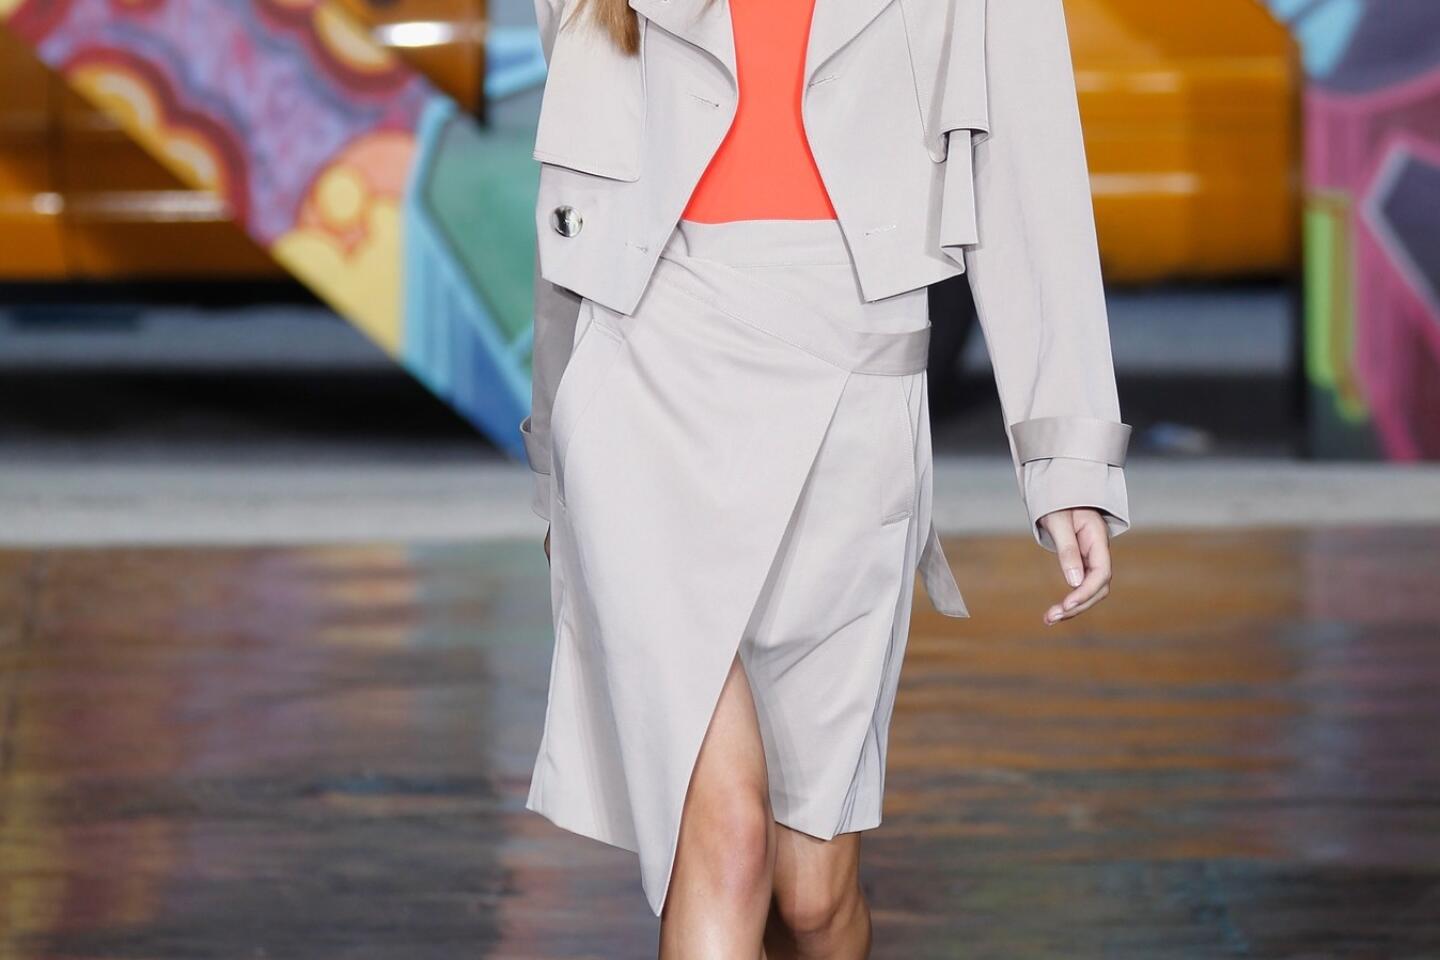 DKNY S/S 2014 presented during NYFW[10]